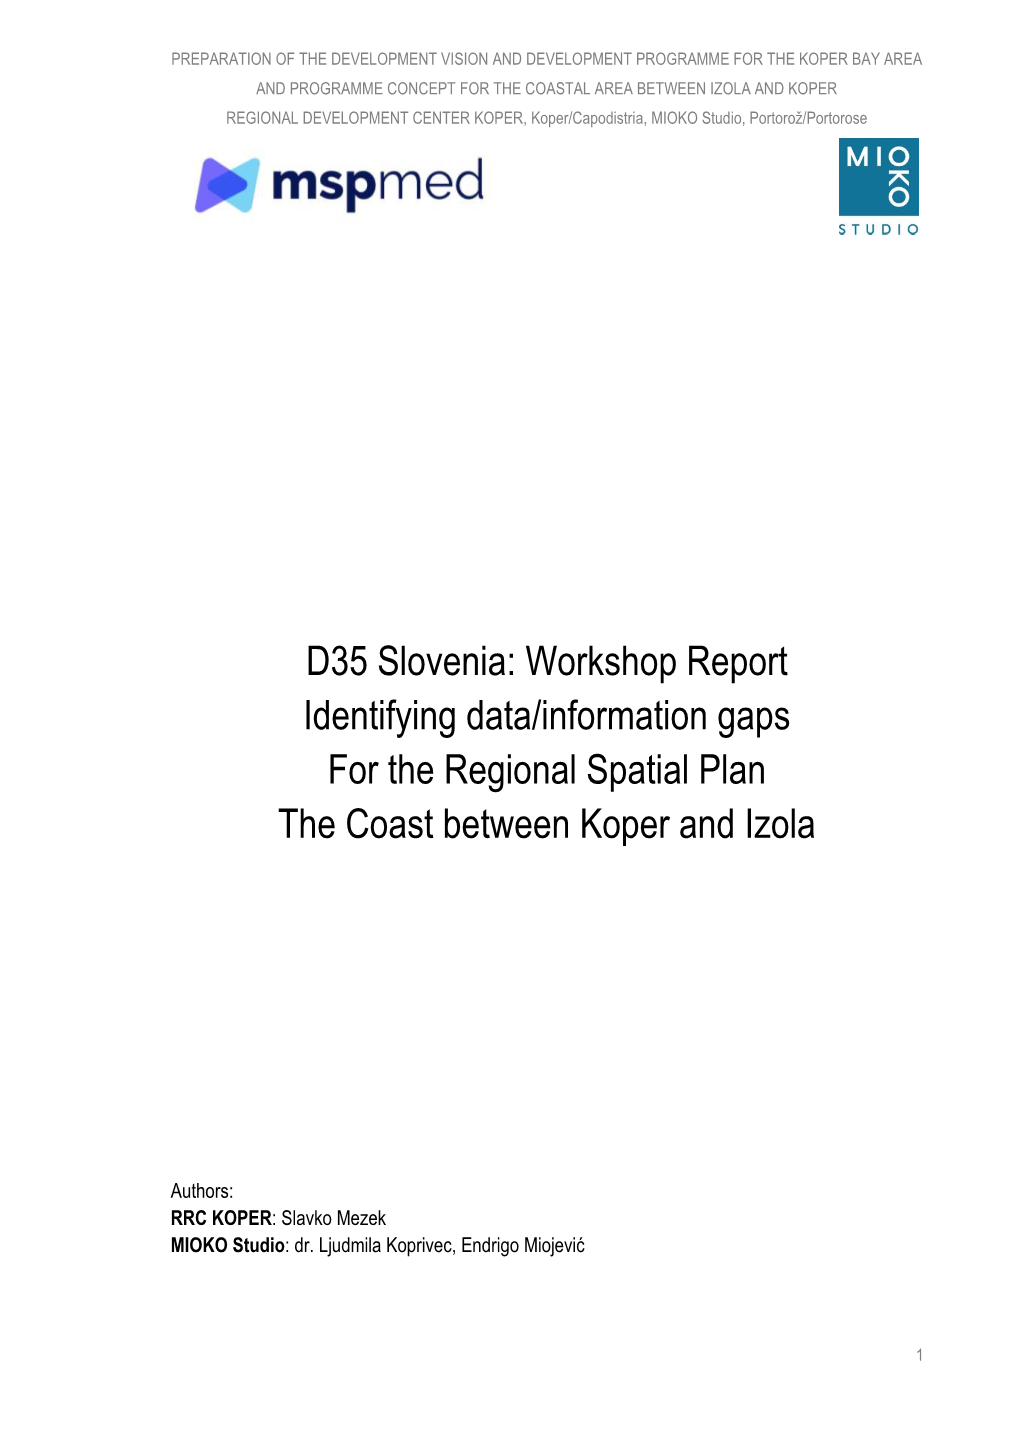 Workshop Report Identifying Data/Information Gaps for the Regional Spatial Plan the Coast Between Koper and Izola